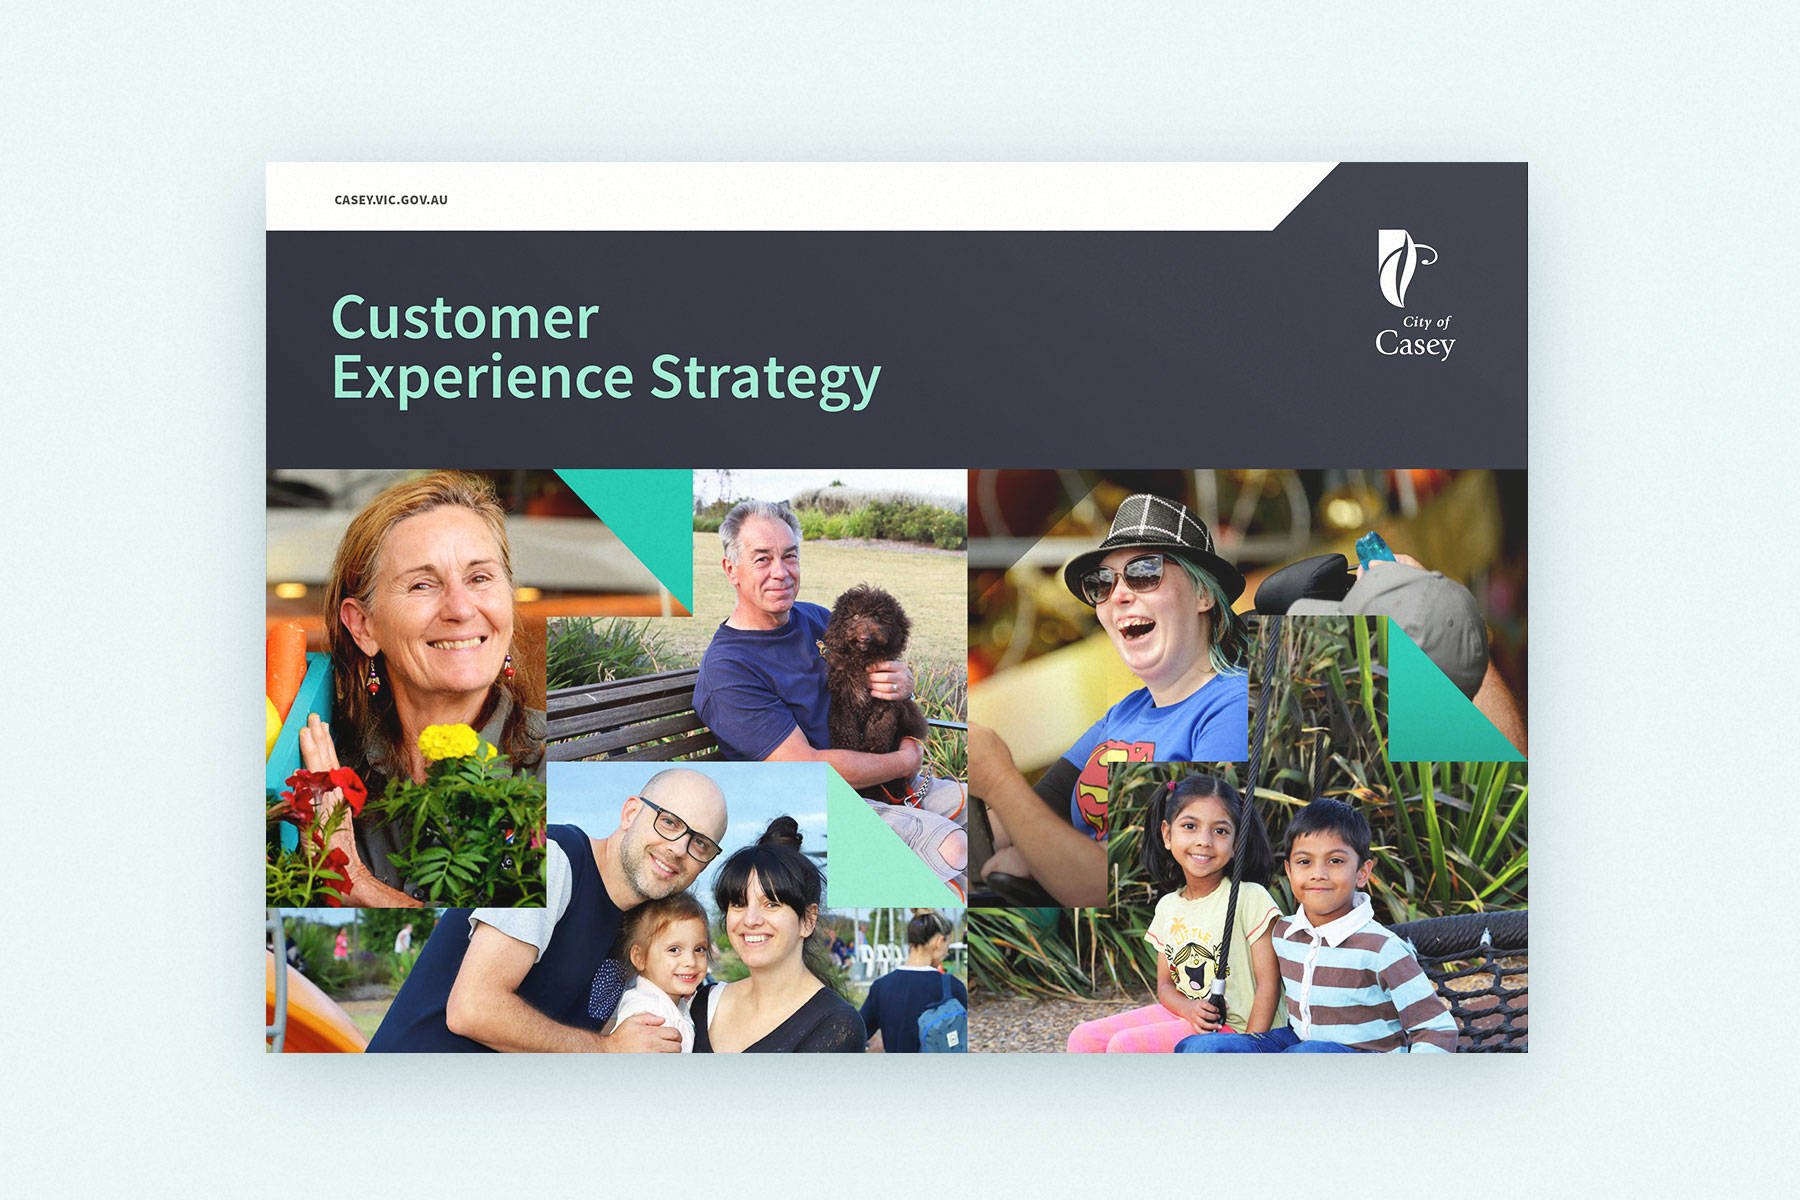 The cover of the CX strategy featuring residents from the City of Casey